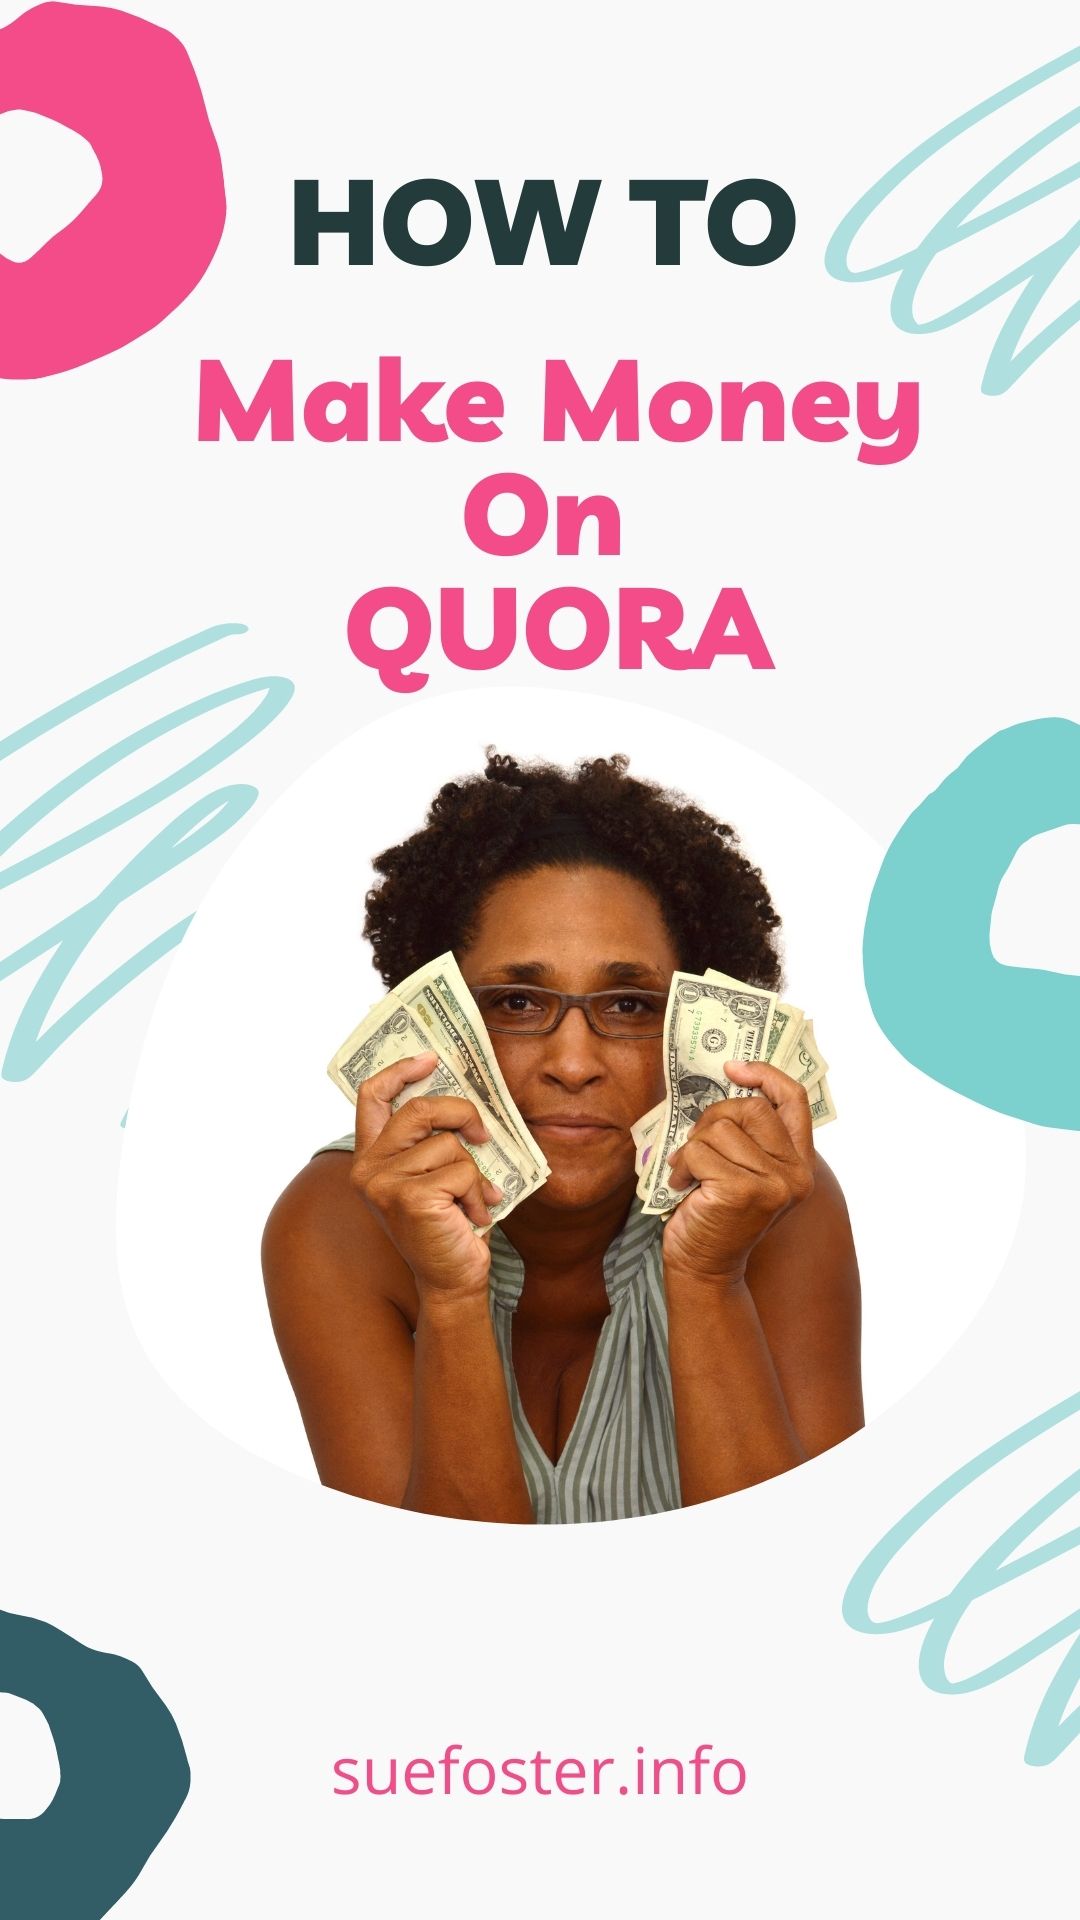 There are several ways to make money on Quora, including advertising, selling subscriptions, and creating content.